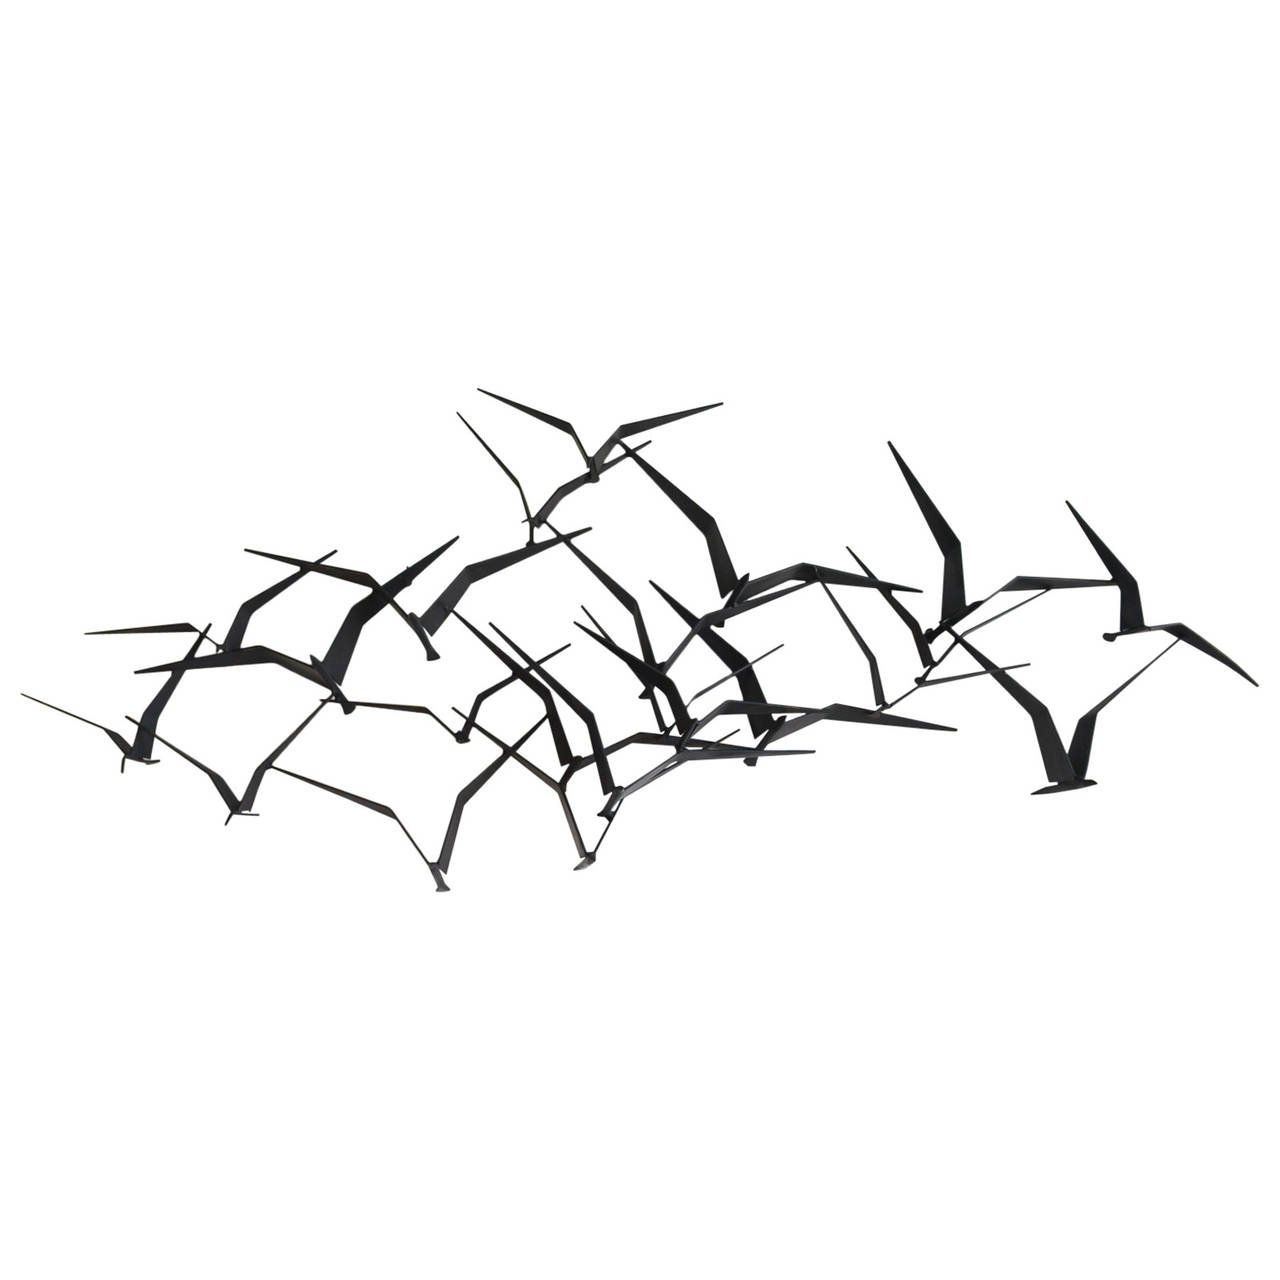 Curtis Jere Birds In Flight Metal Wall Sculpture At 1stdibs With Well Known Birds In Flight Metal Wall Art (View 4 of 15)